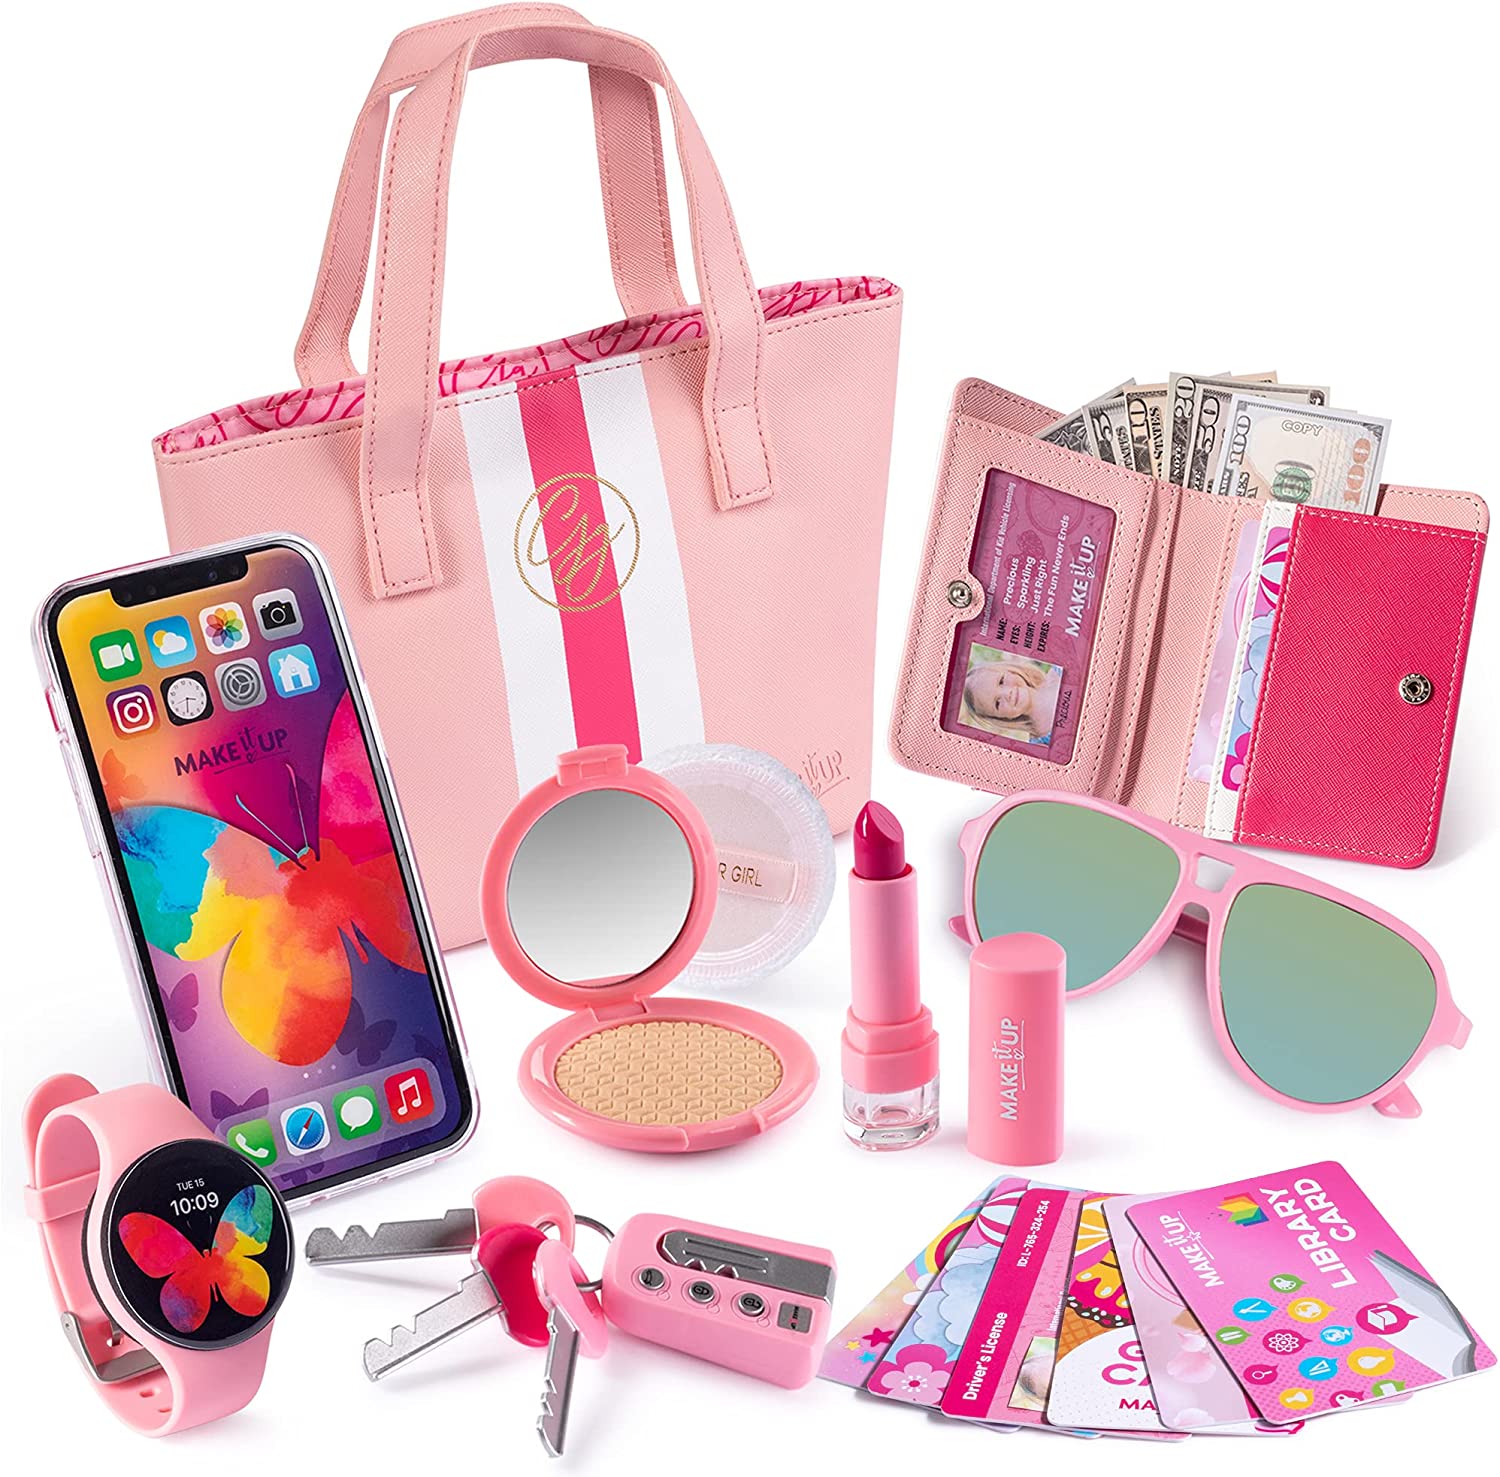 Toddler Girl's Purse - Come on Barbie